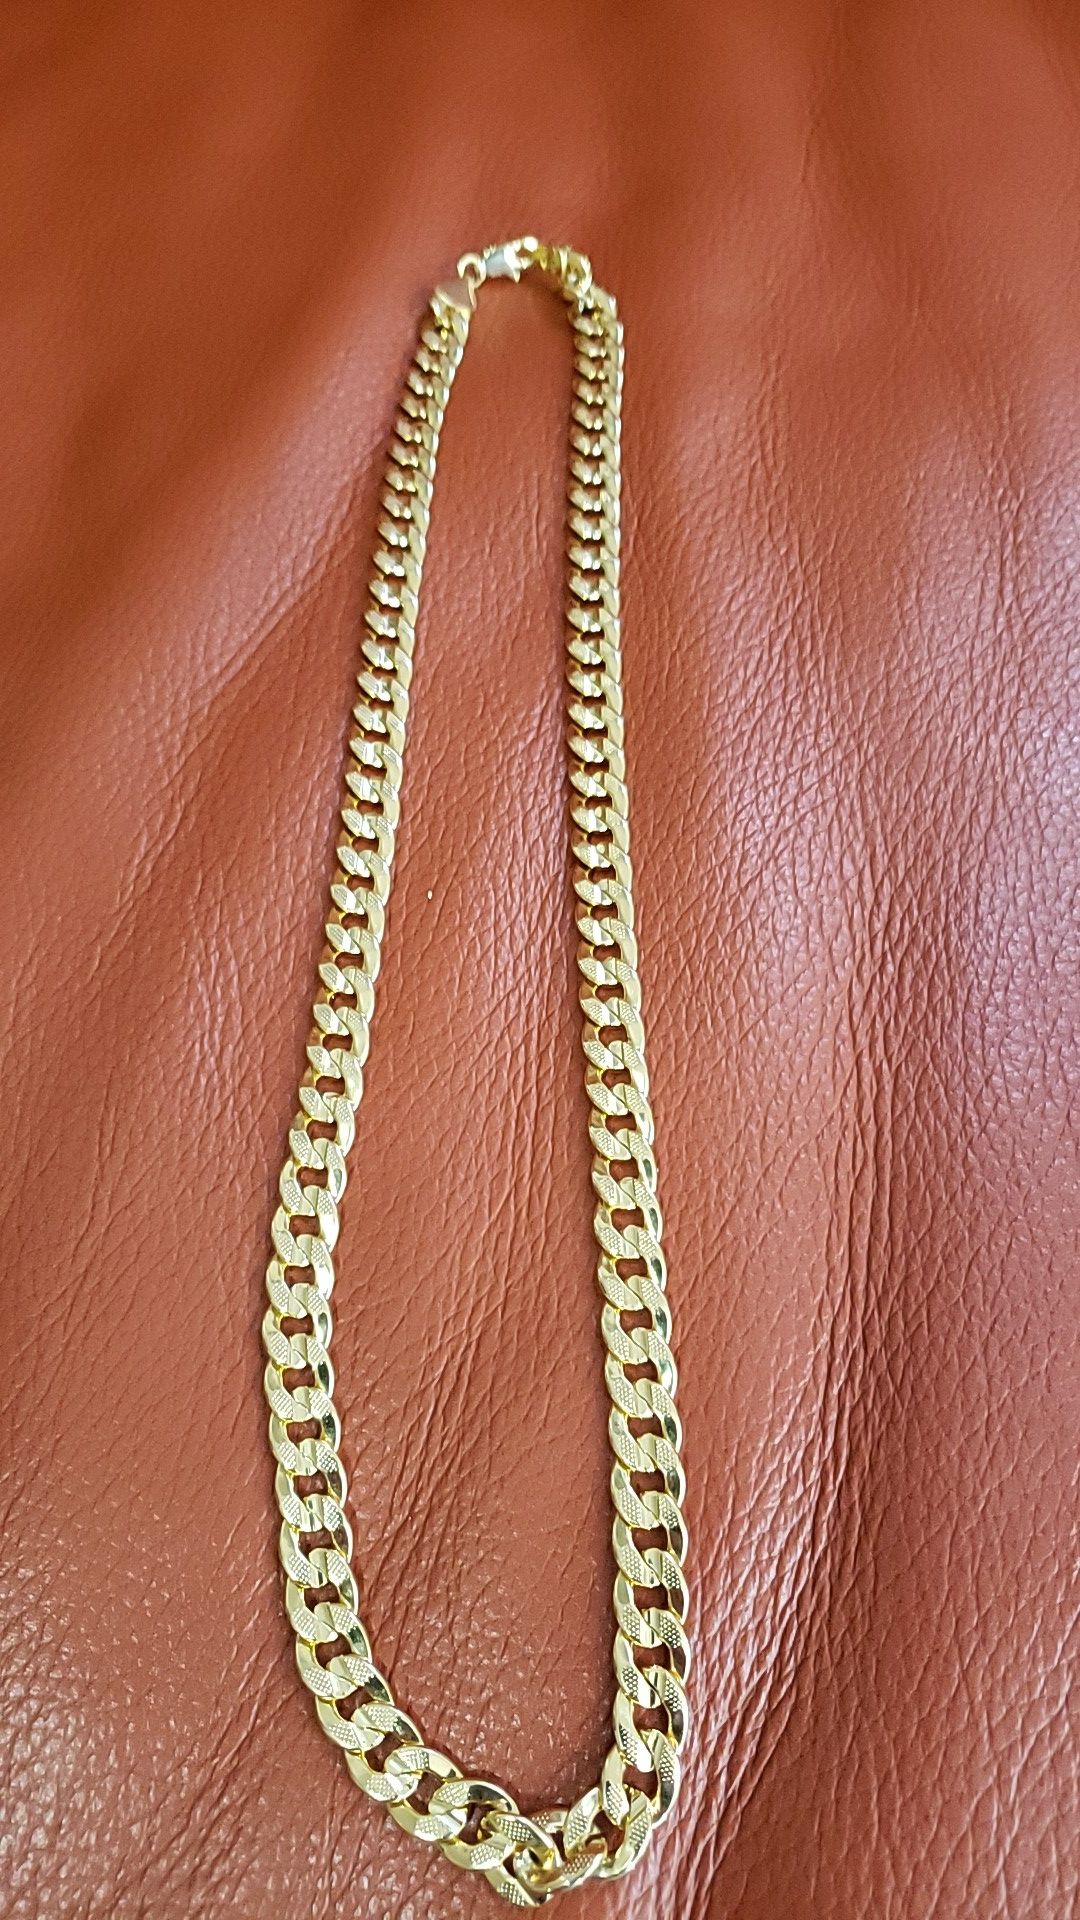 Plated gold chain